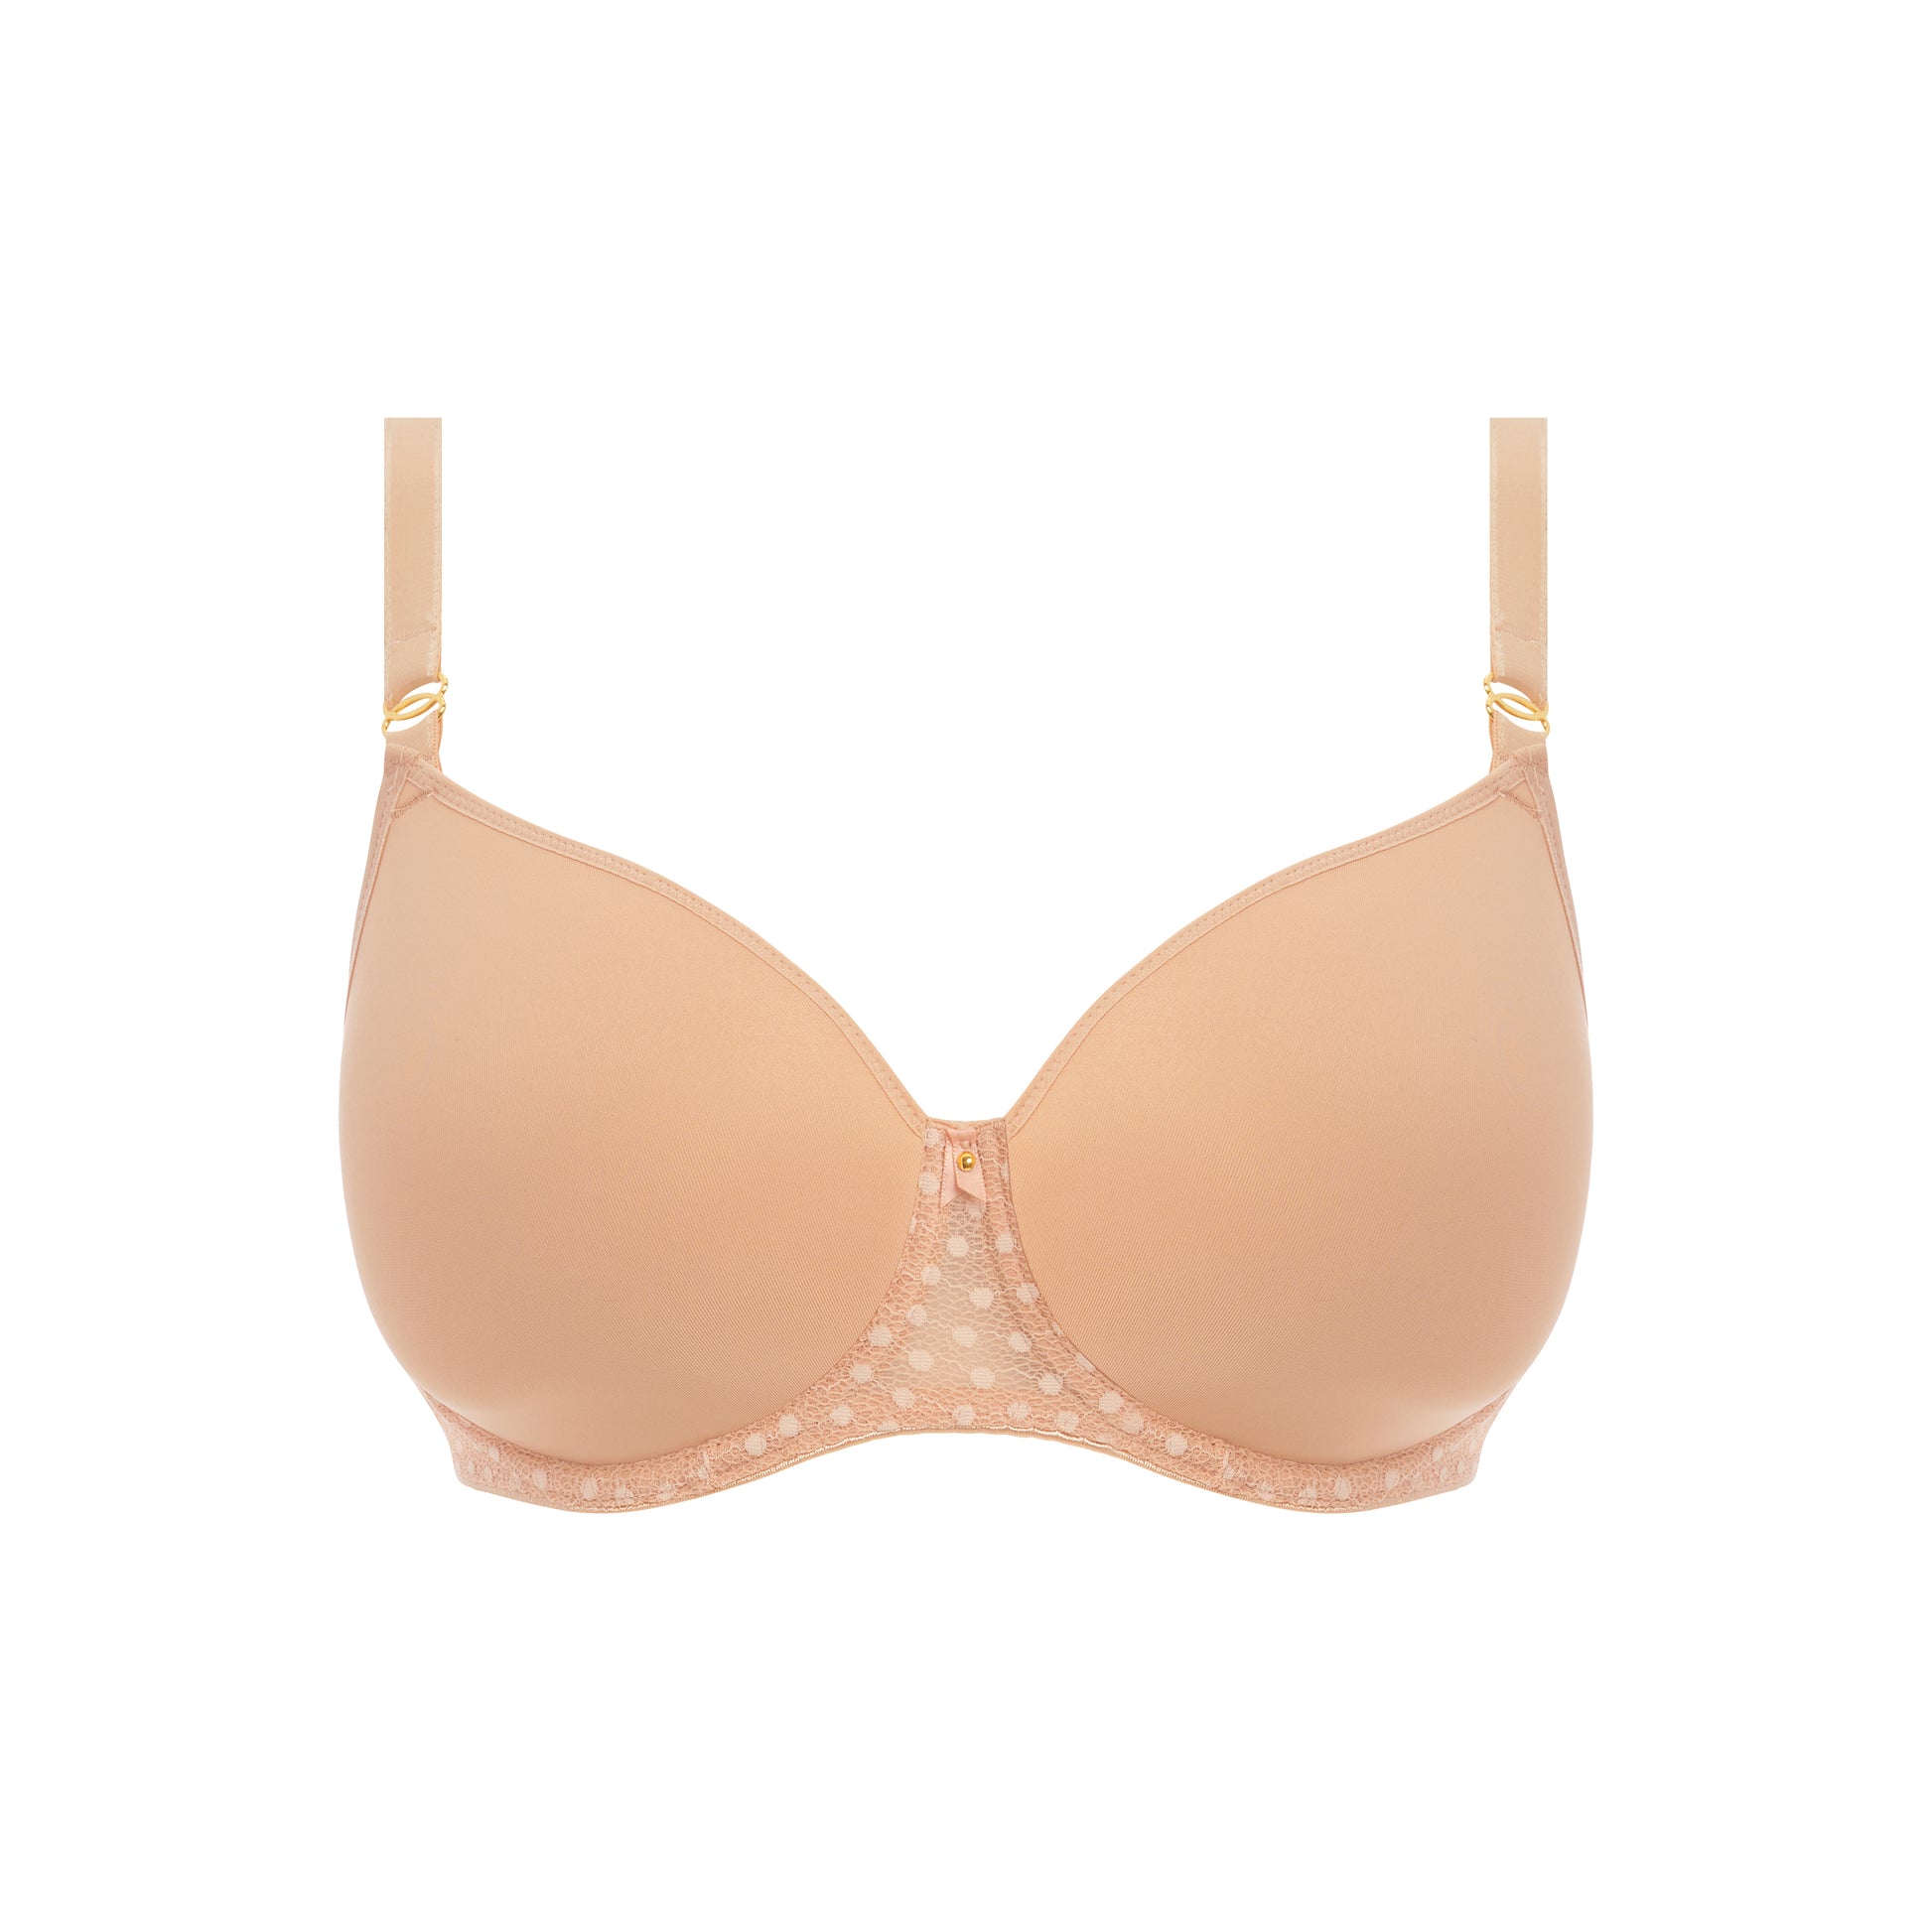 Starlight Moulded Bra - Caramel front view product image